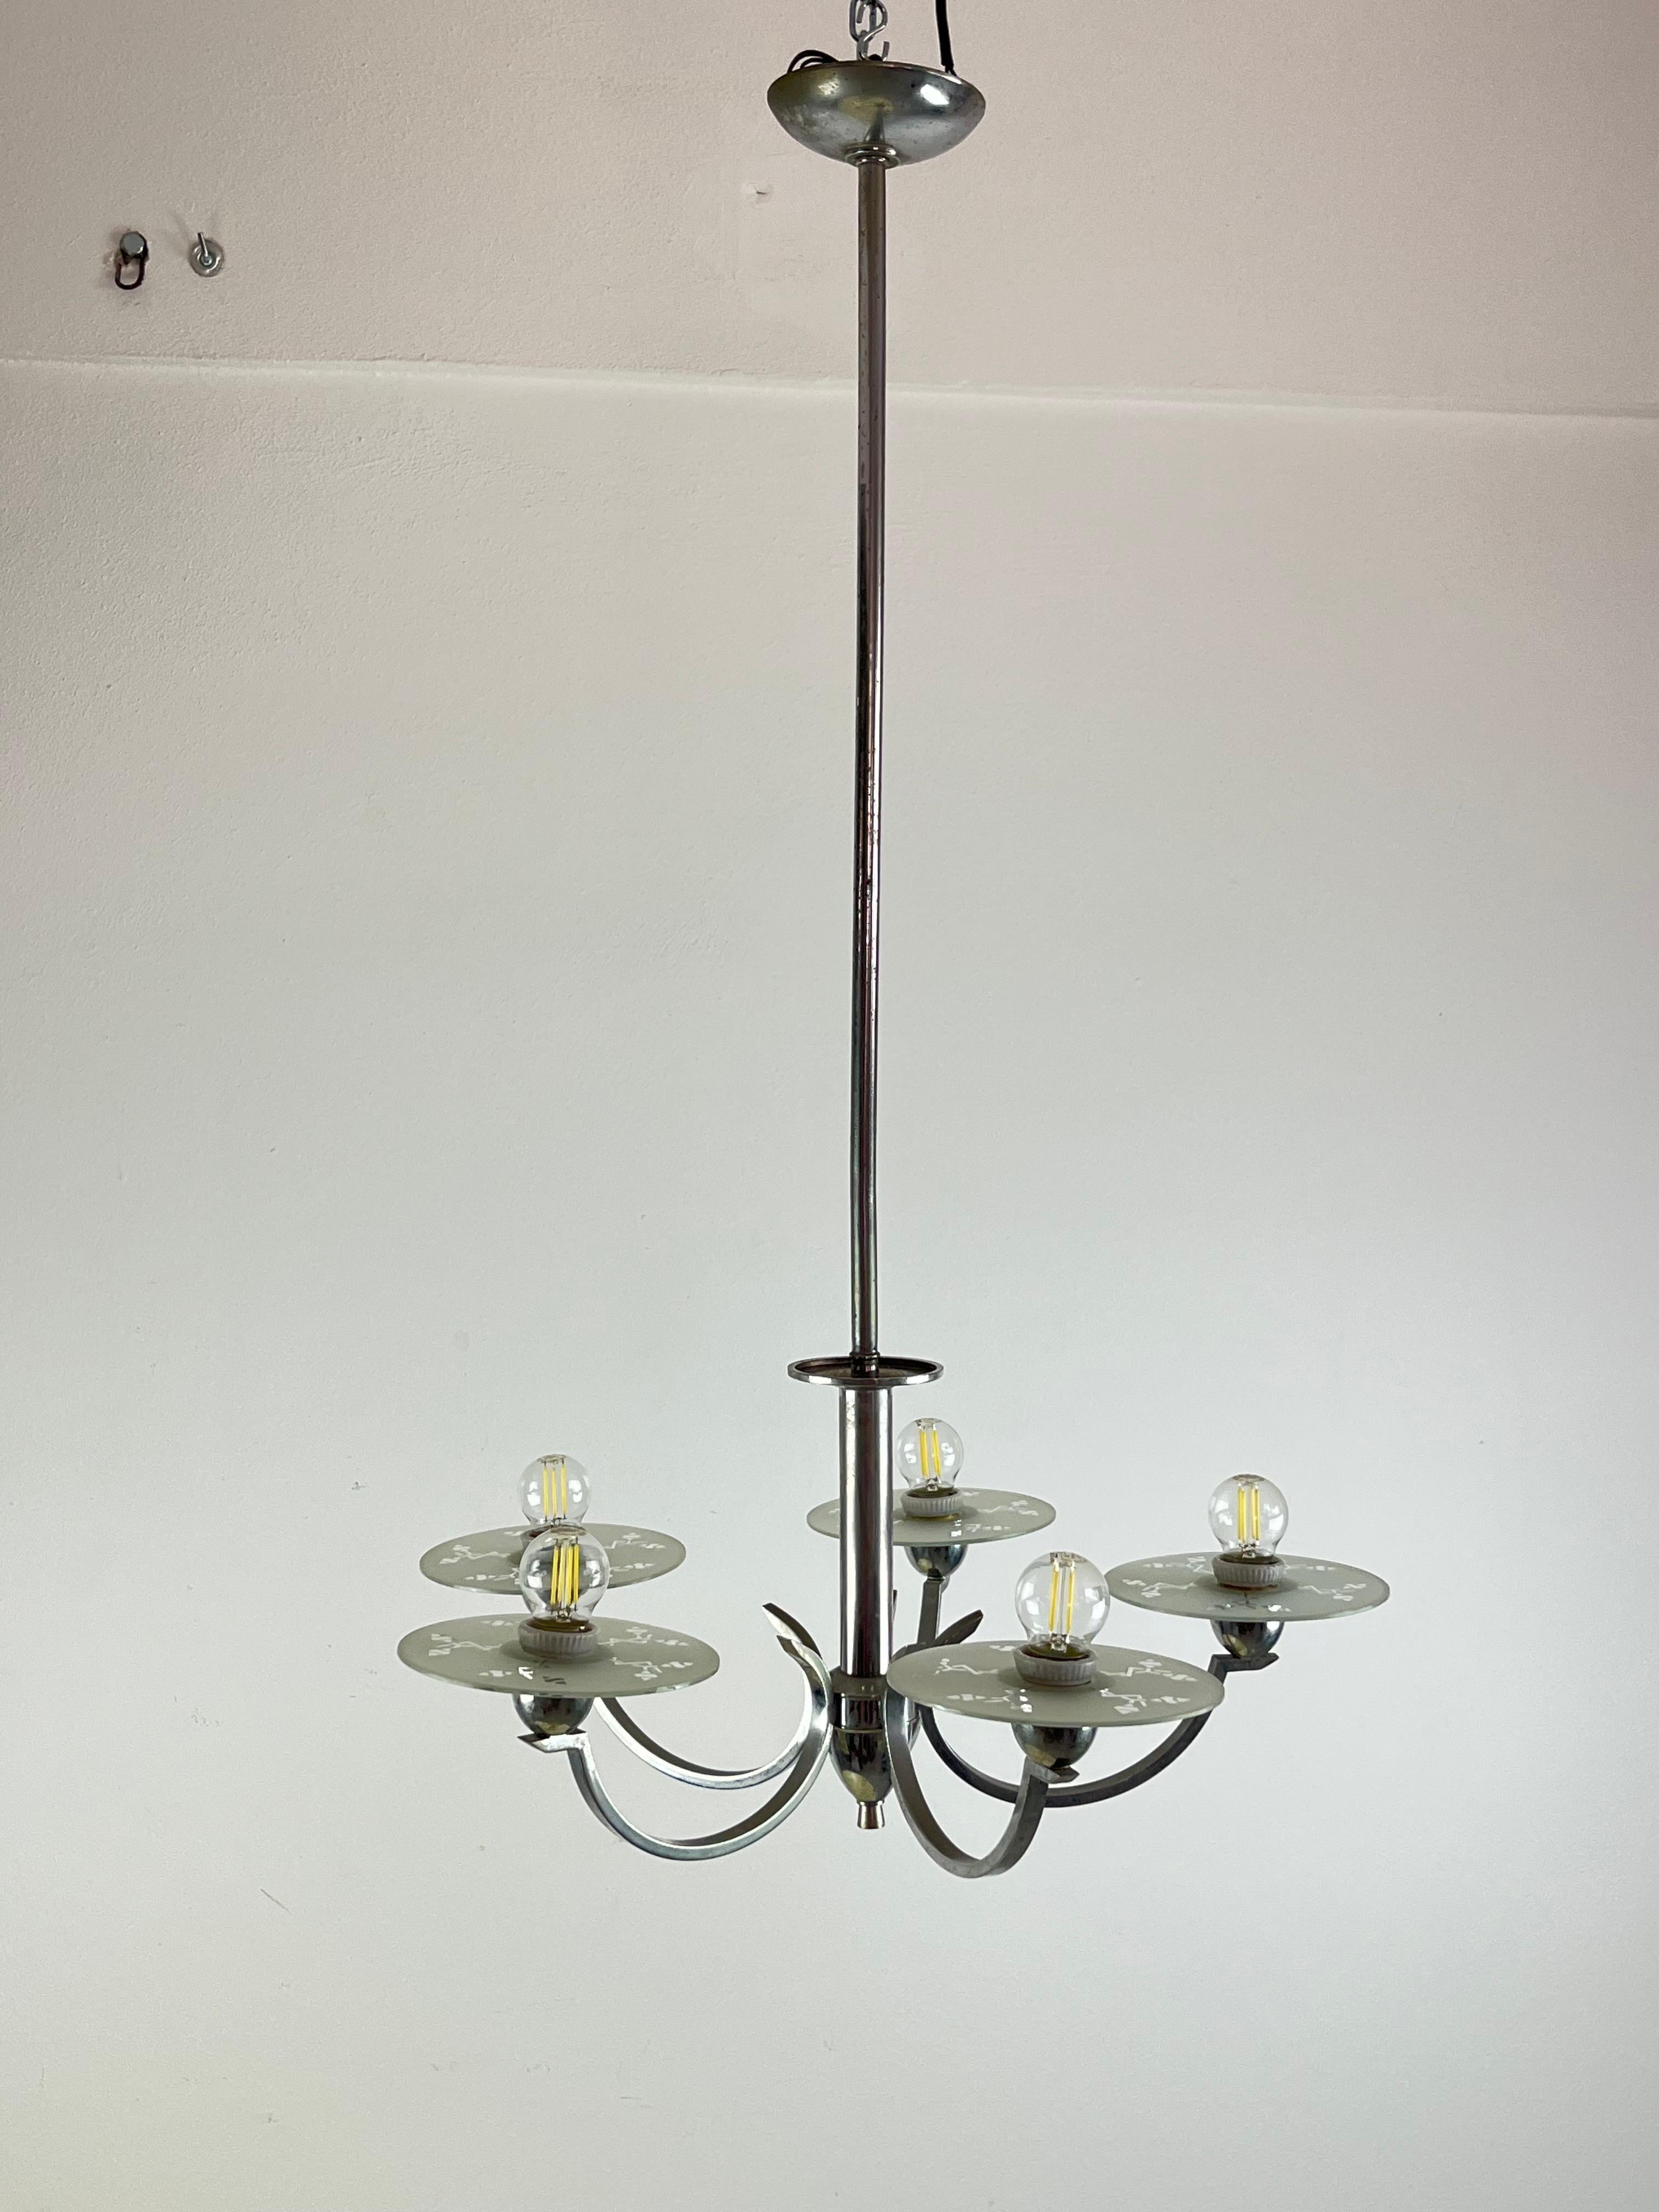 5-light metal and glass chandelier, Italy, 1940s
Found in a noble apartment. Intact glasses, small lesion on the stem.
Working.